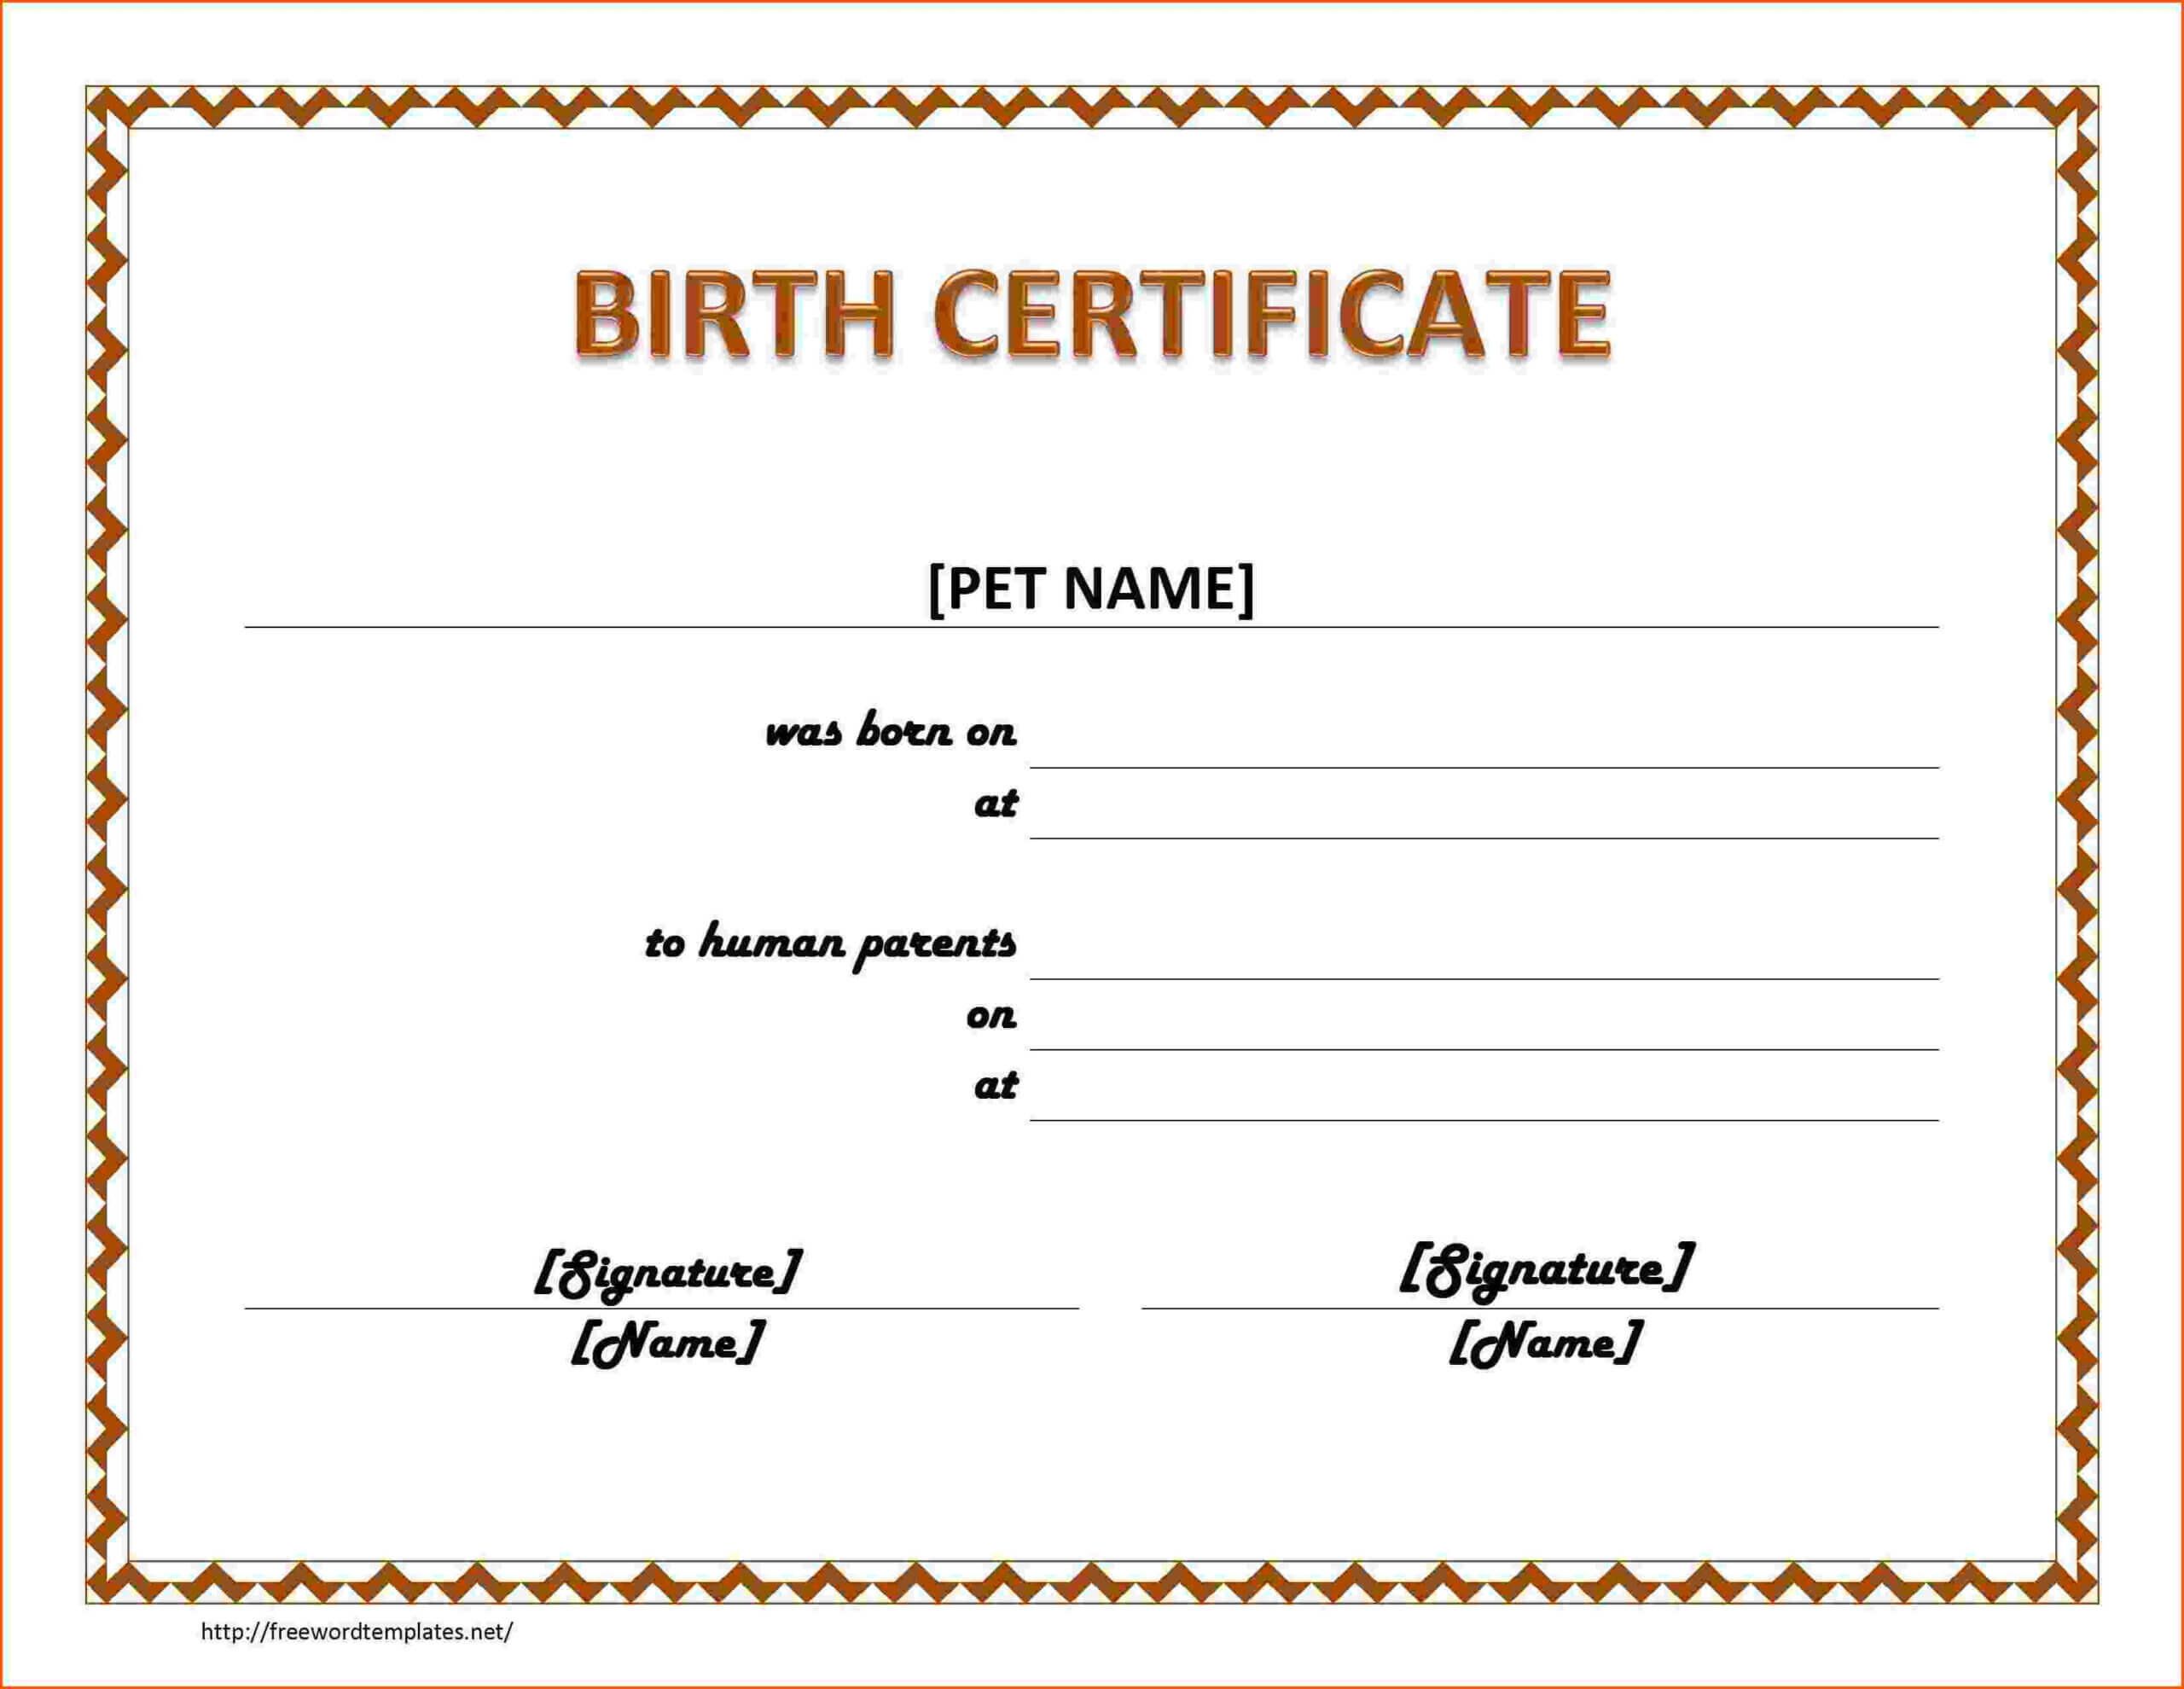 6+ Birth Certificate Template For Microsoft Word | Survey In Birth Certificate Template For Microsoft Word